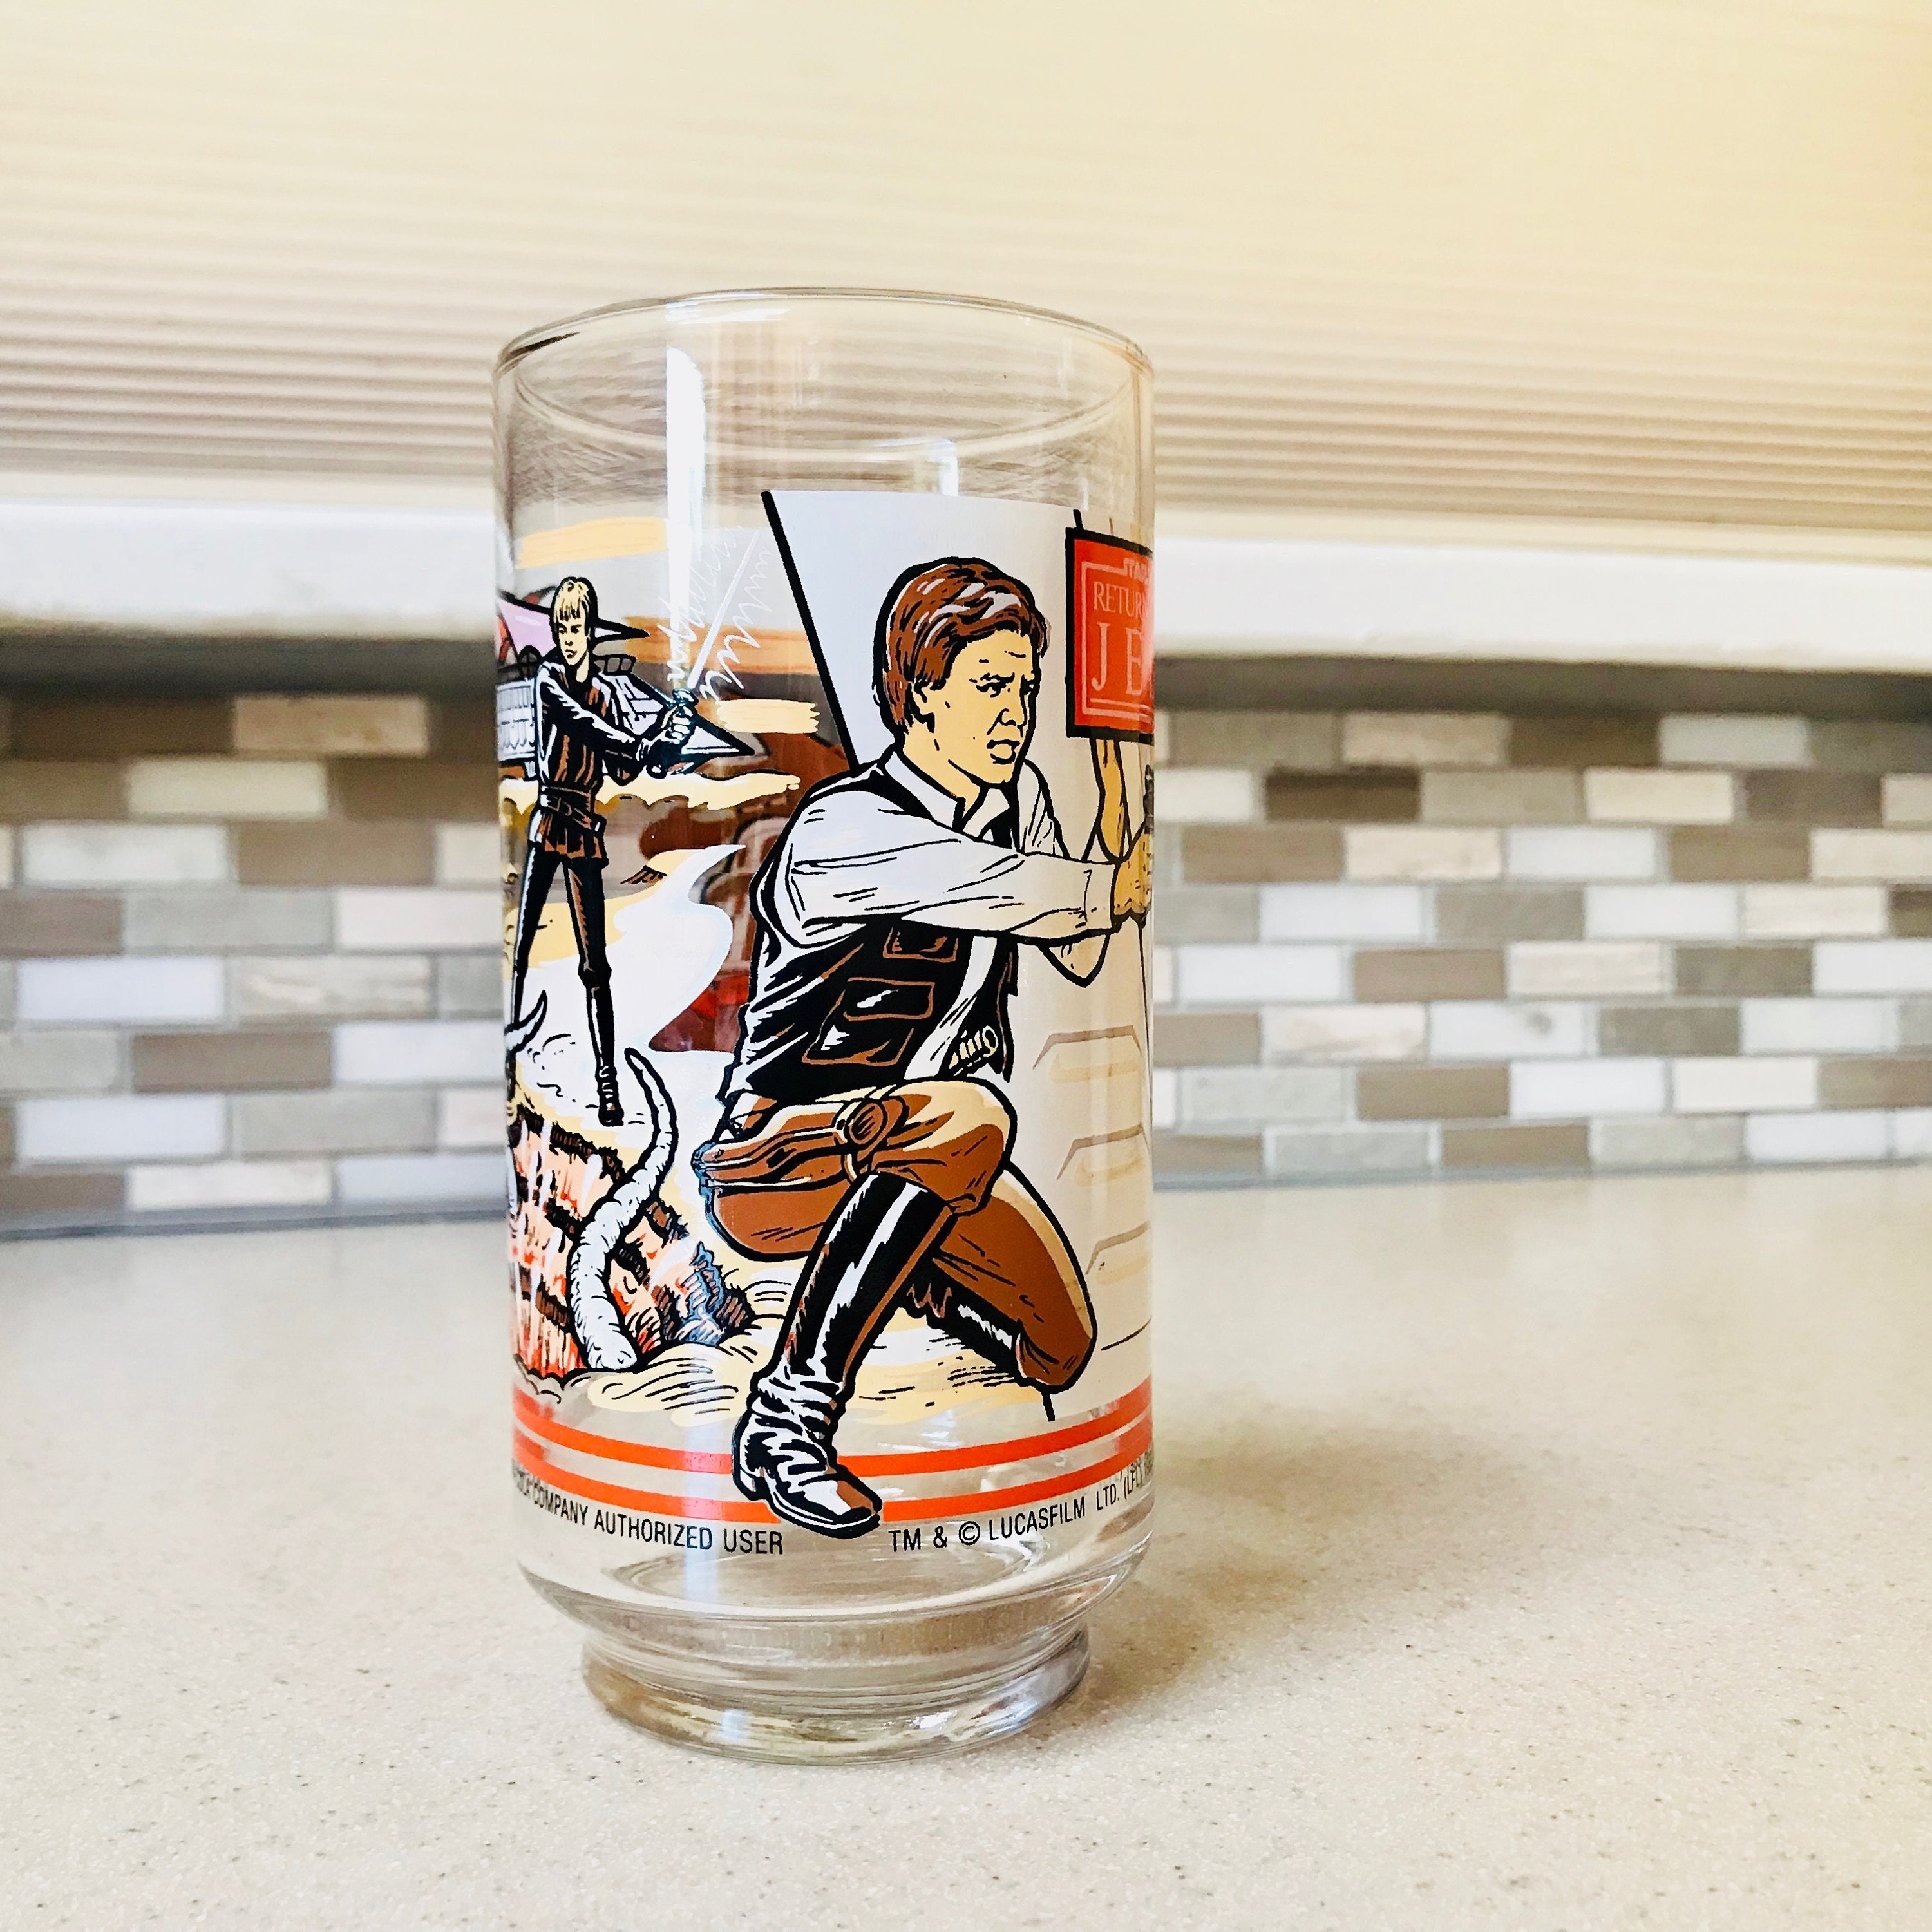 Vintage Star Wars and Return of The Jedi Limited Edition Drinking Glasses  Set